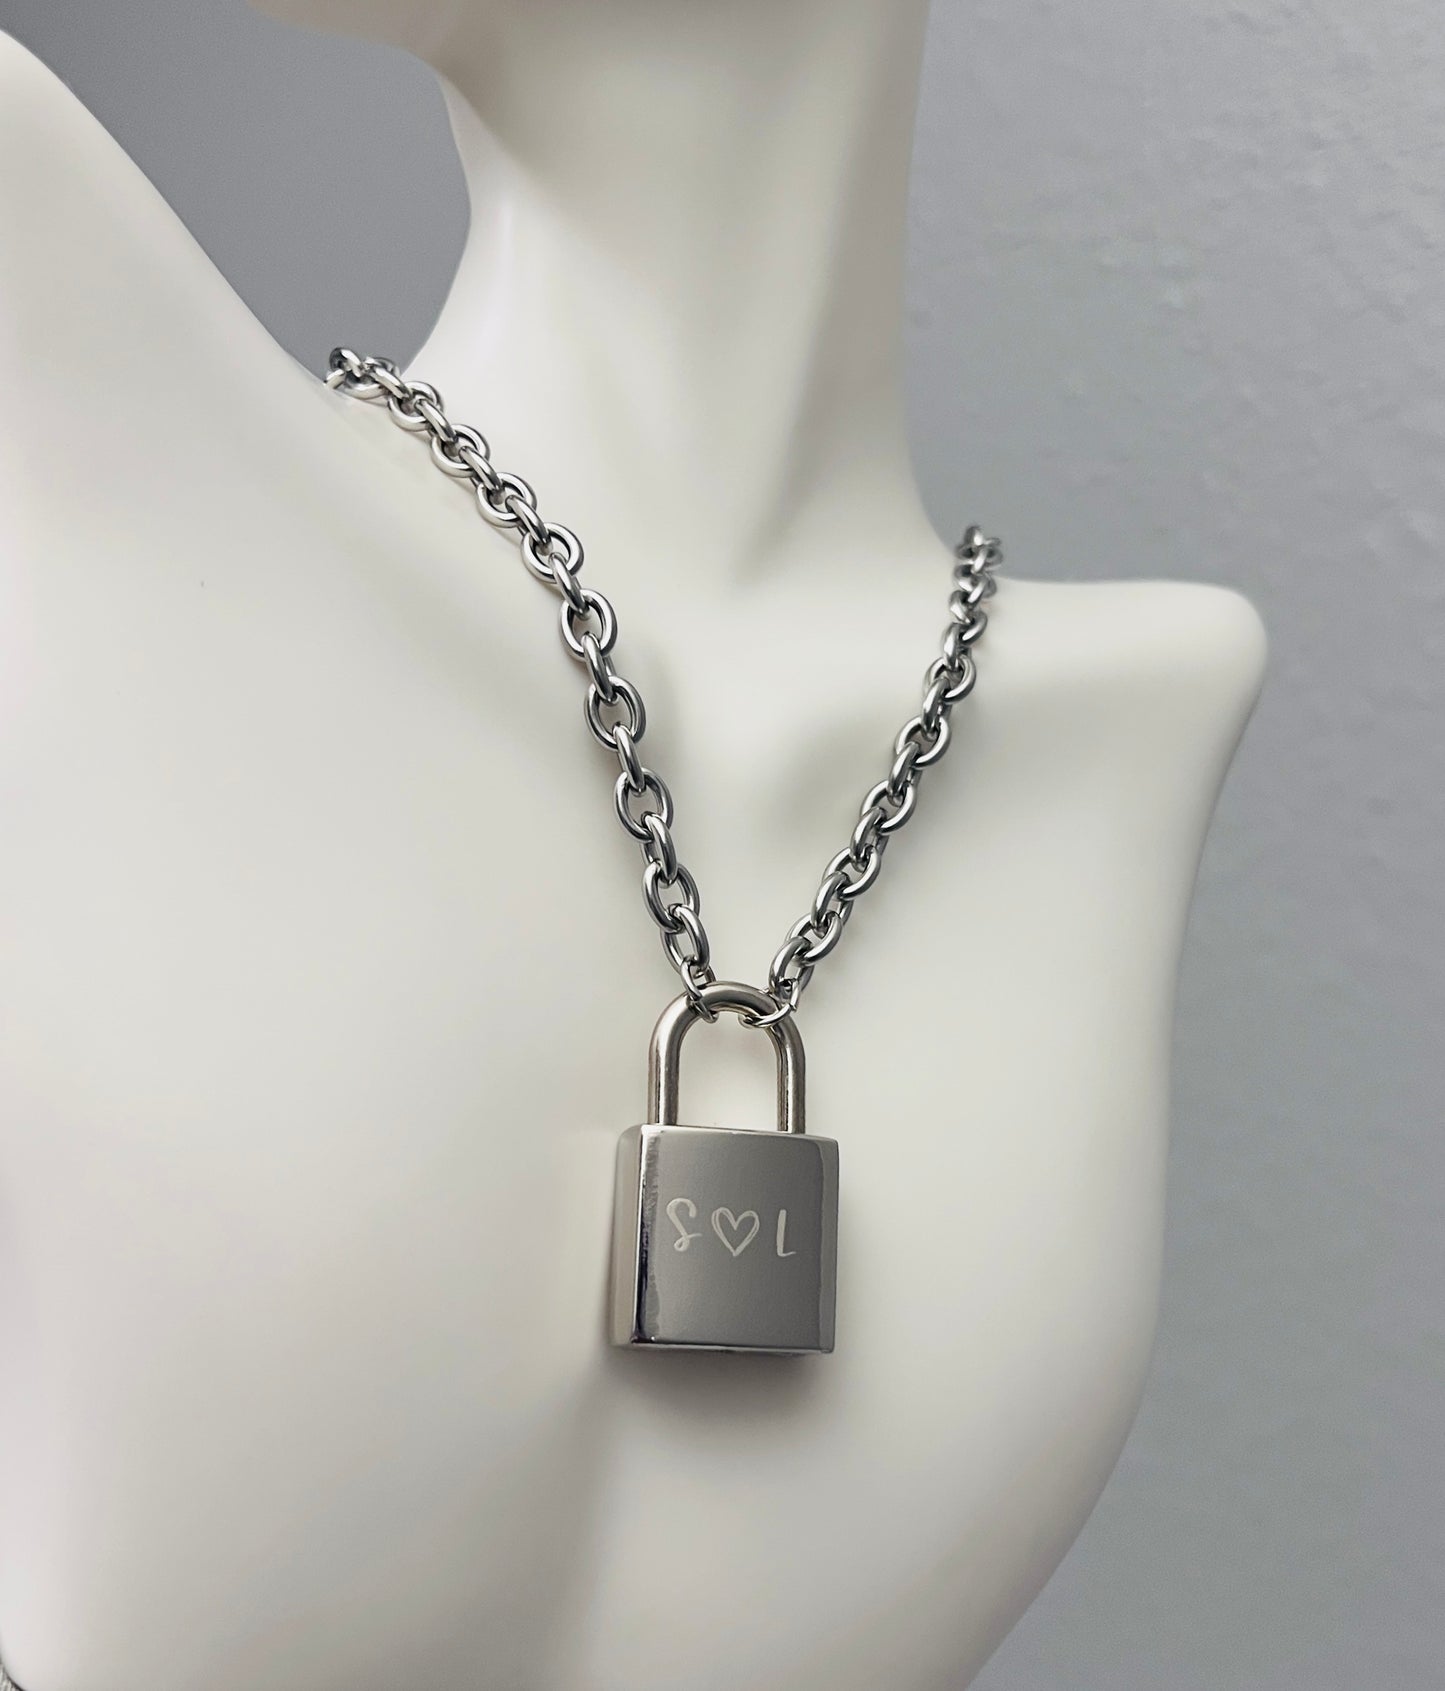 S and L | The universe wasn't done with us | Brit Benson | Padlock & Key Necklace Set